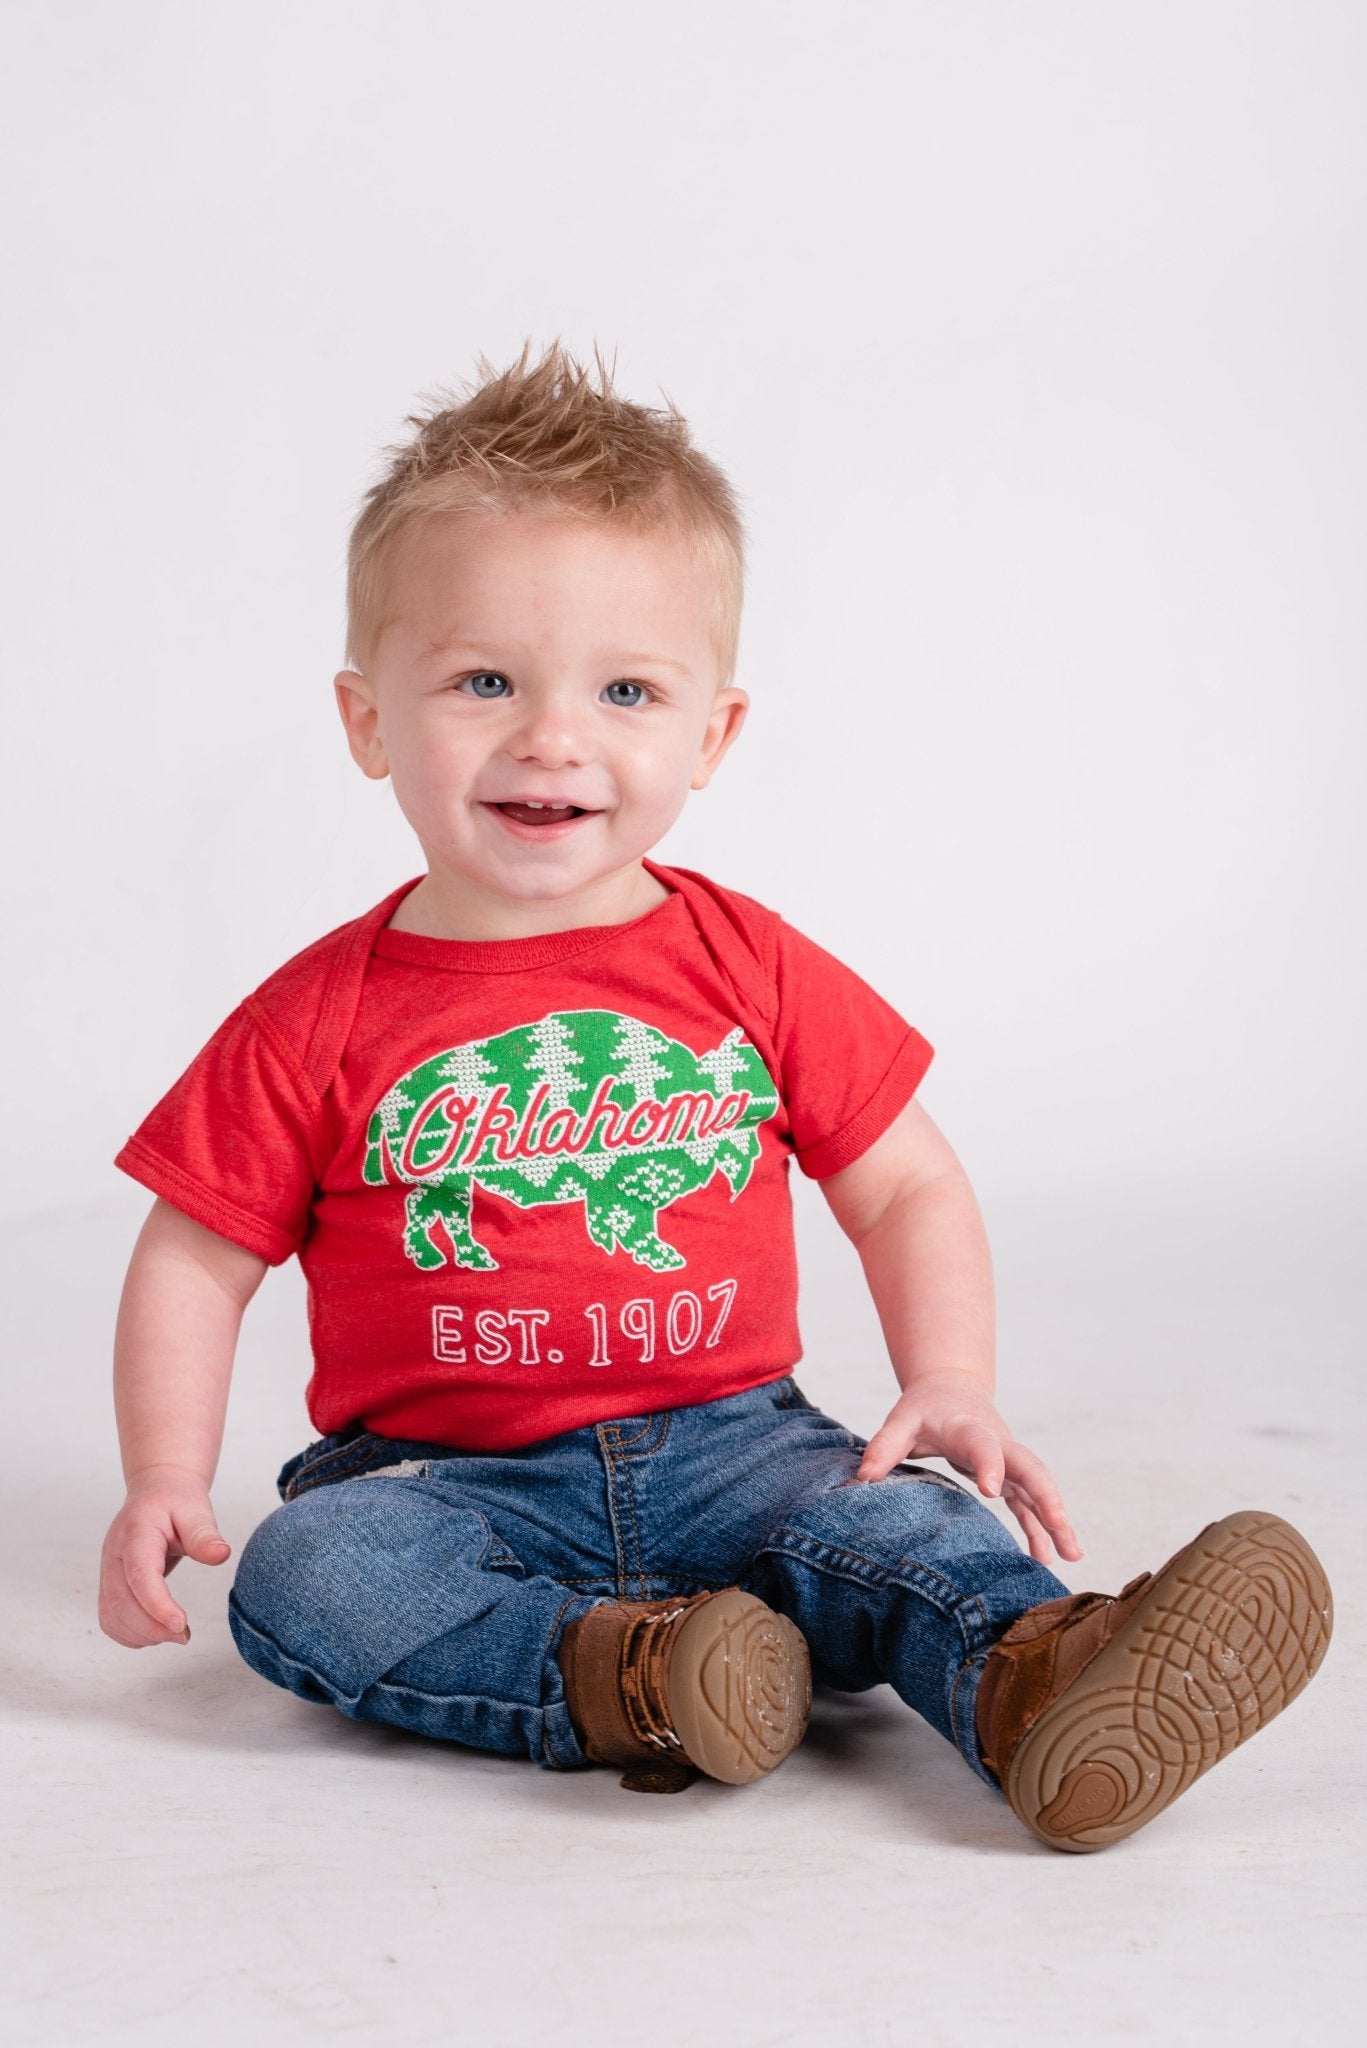 KIDS Oklahoma tree bison onesie red - Cute Onesie - Trendy Kids Apparel at Lush Fashion Lounge Boutique in Oklahoma City